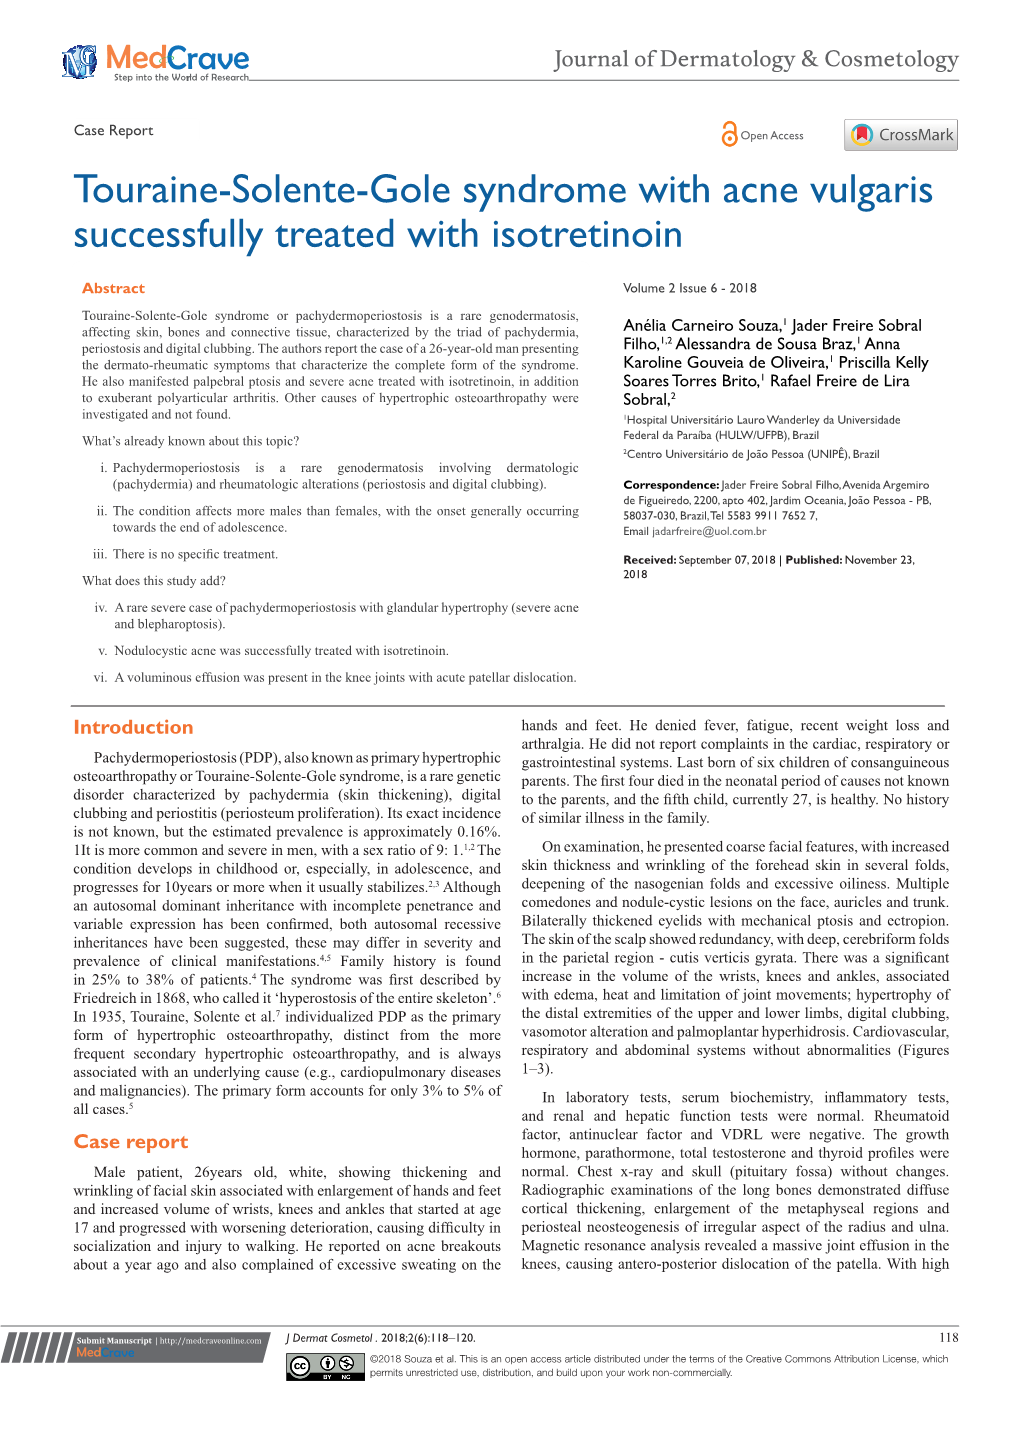 Touraine-Solente-Gole Syndrome with Acne Vulgaris Successfully Treated with Isotretinoin